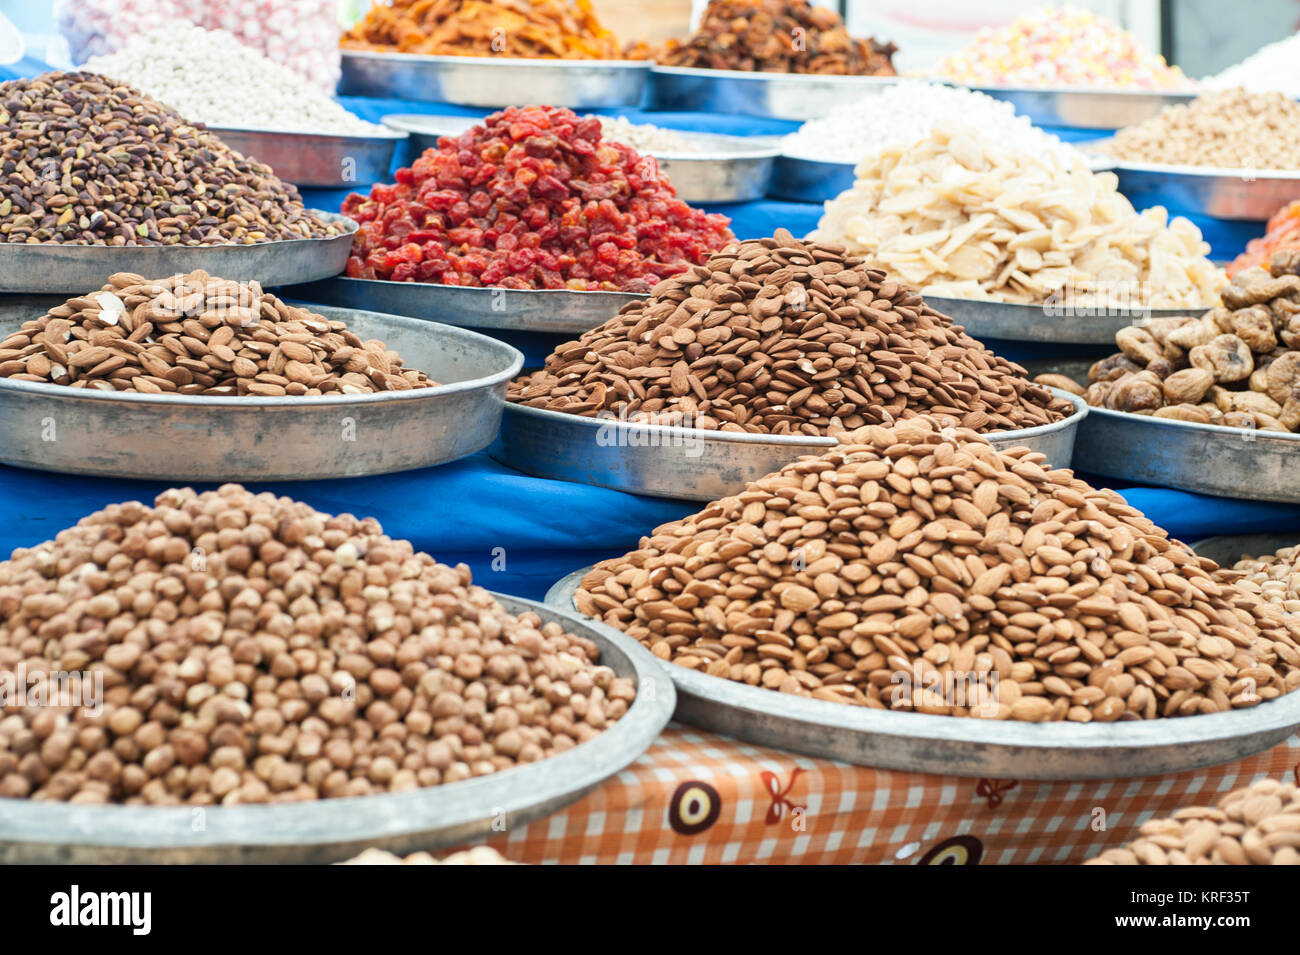 the colors, the aromas and the atmosphere of the Turgutris market in Turkey Stock Photo